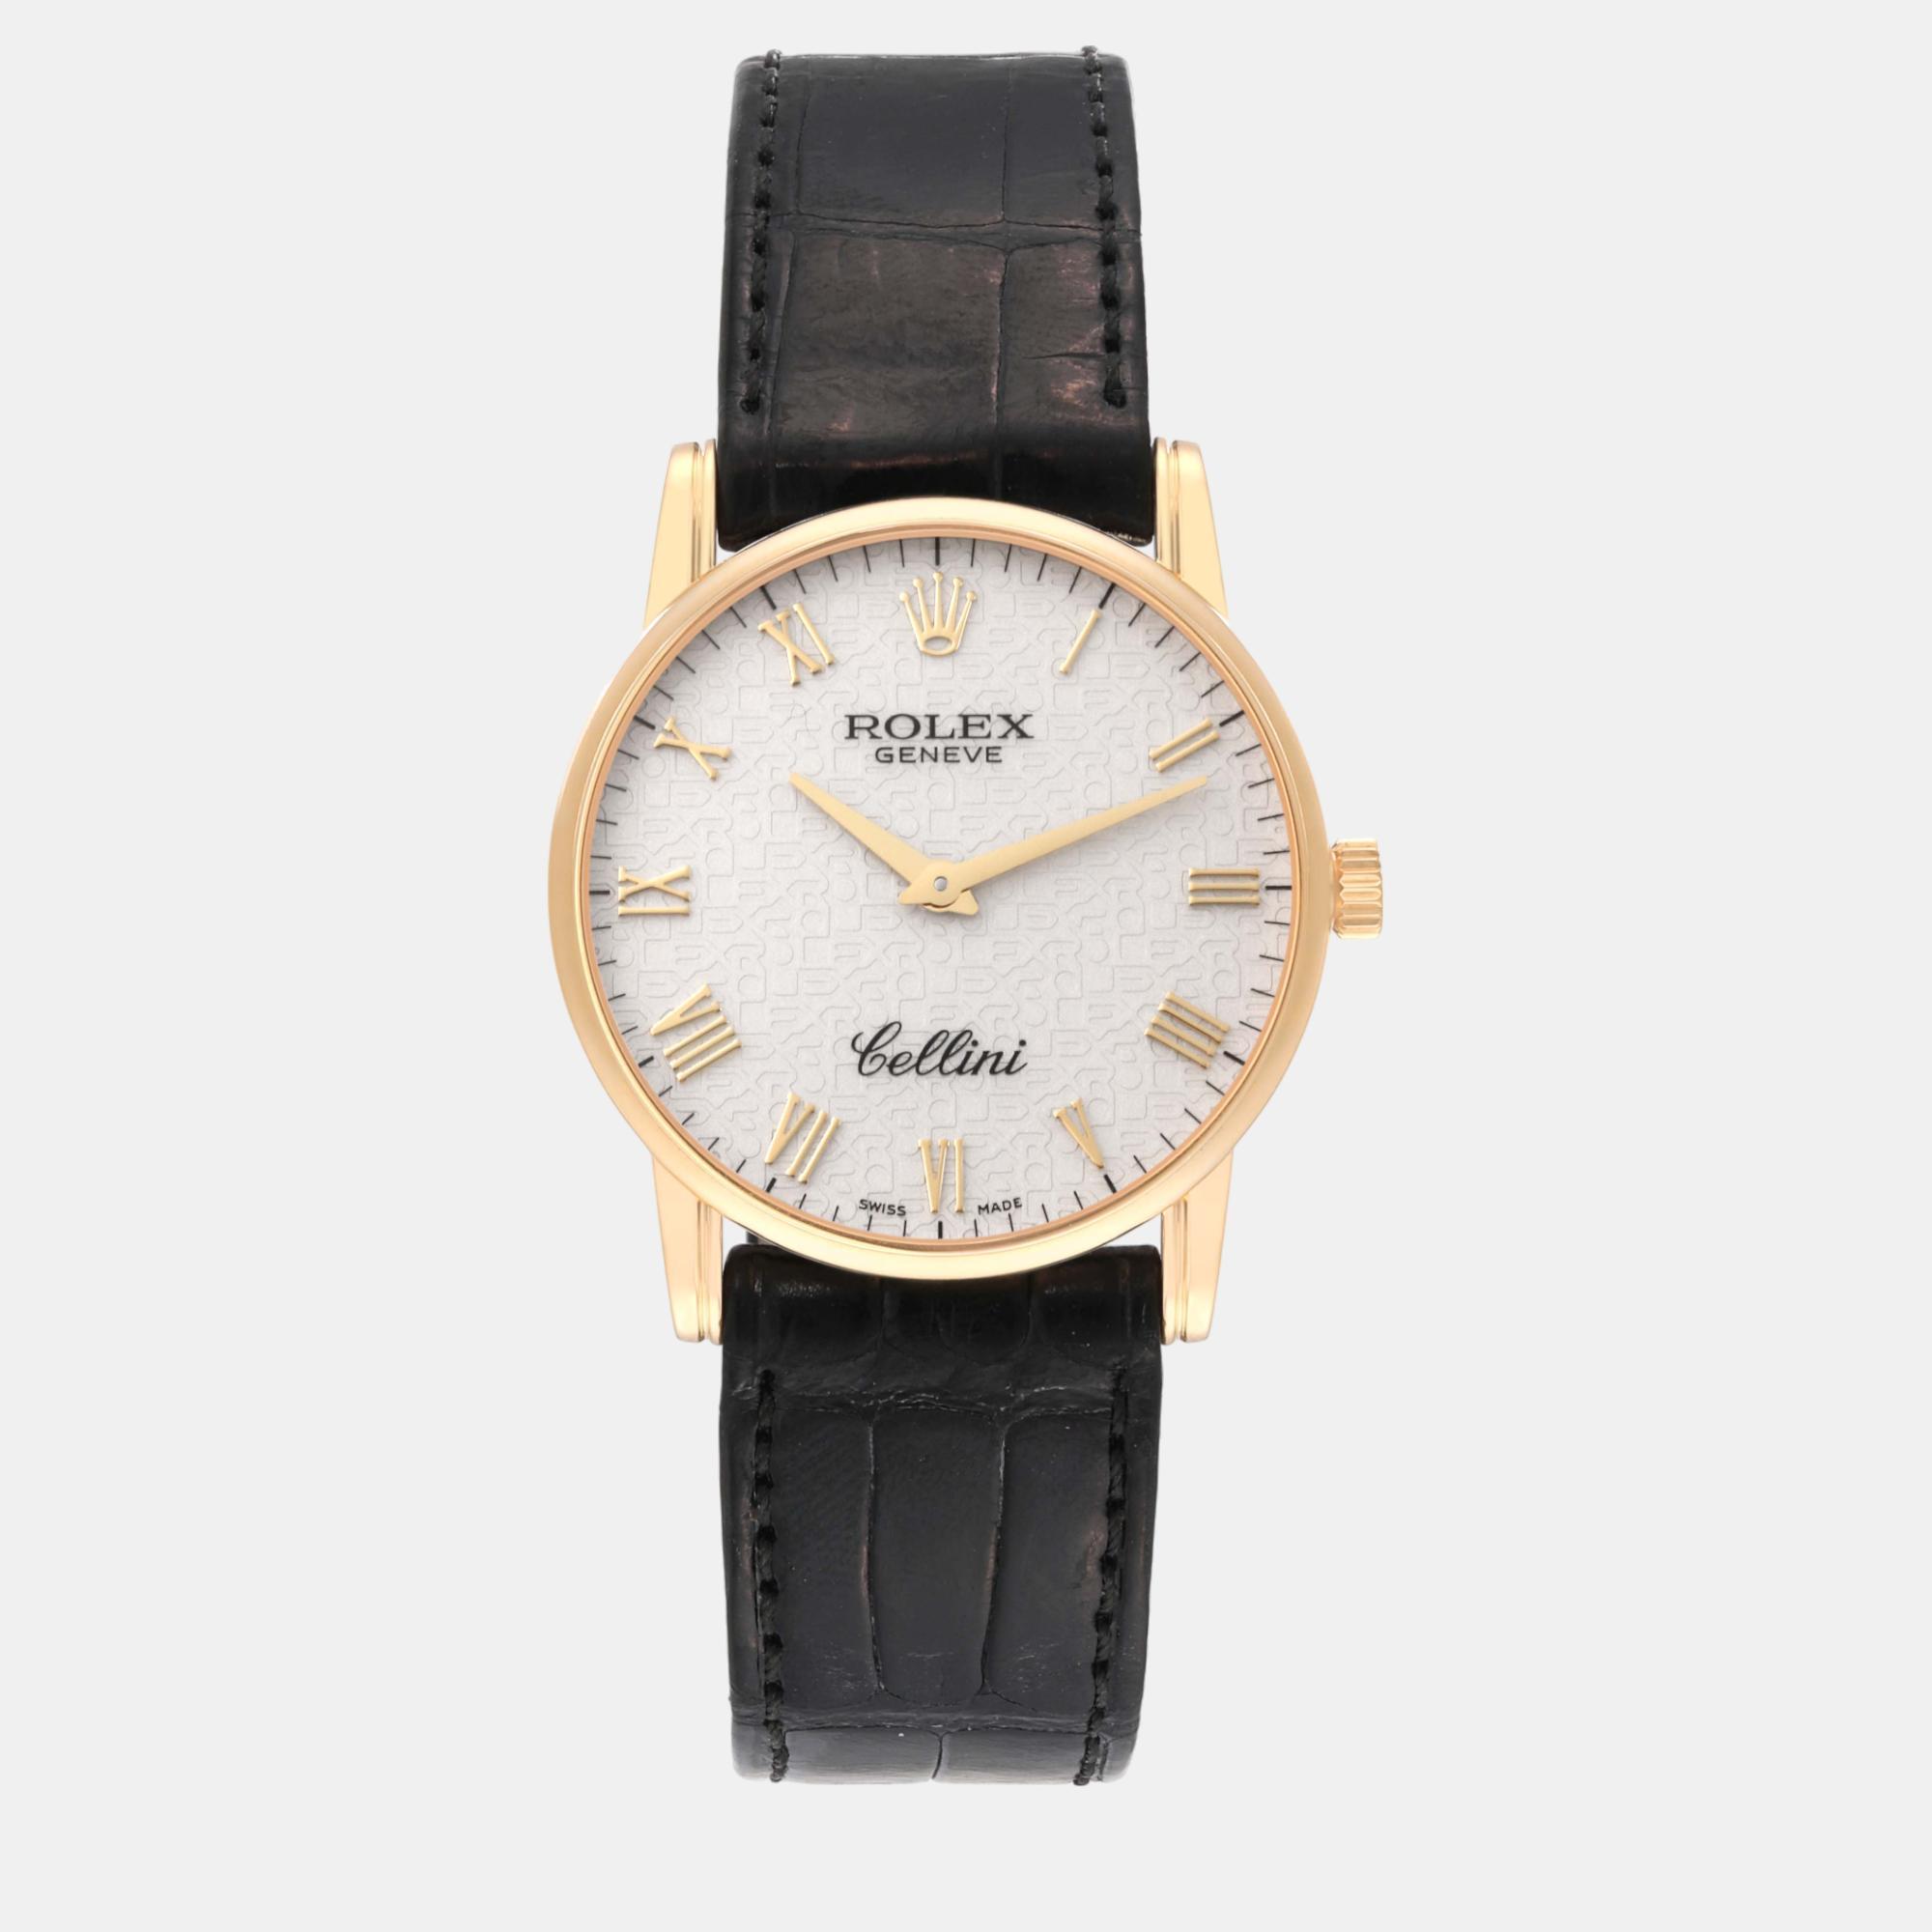 

Rolex Cellini Classic Yellow Gold Anniversary Dial Mens Watch 5116, White